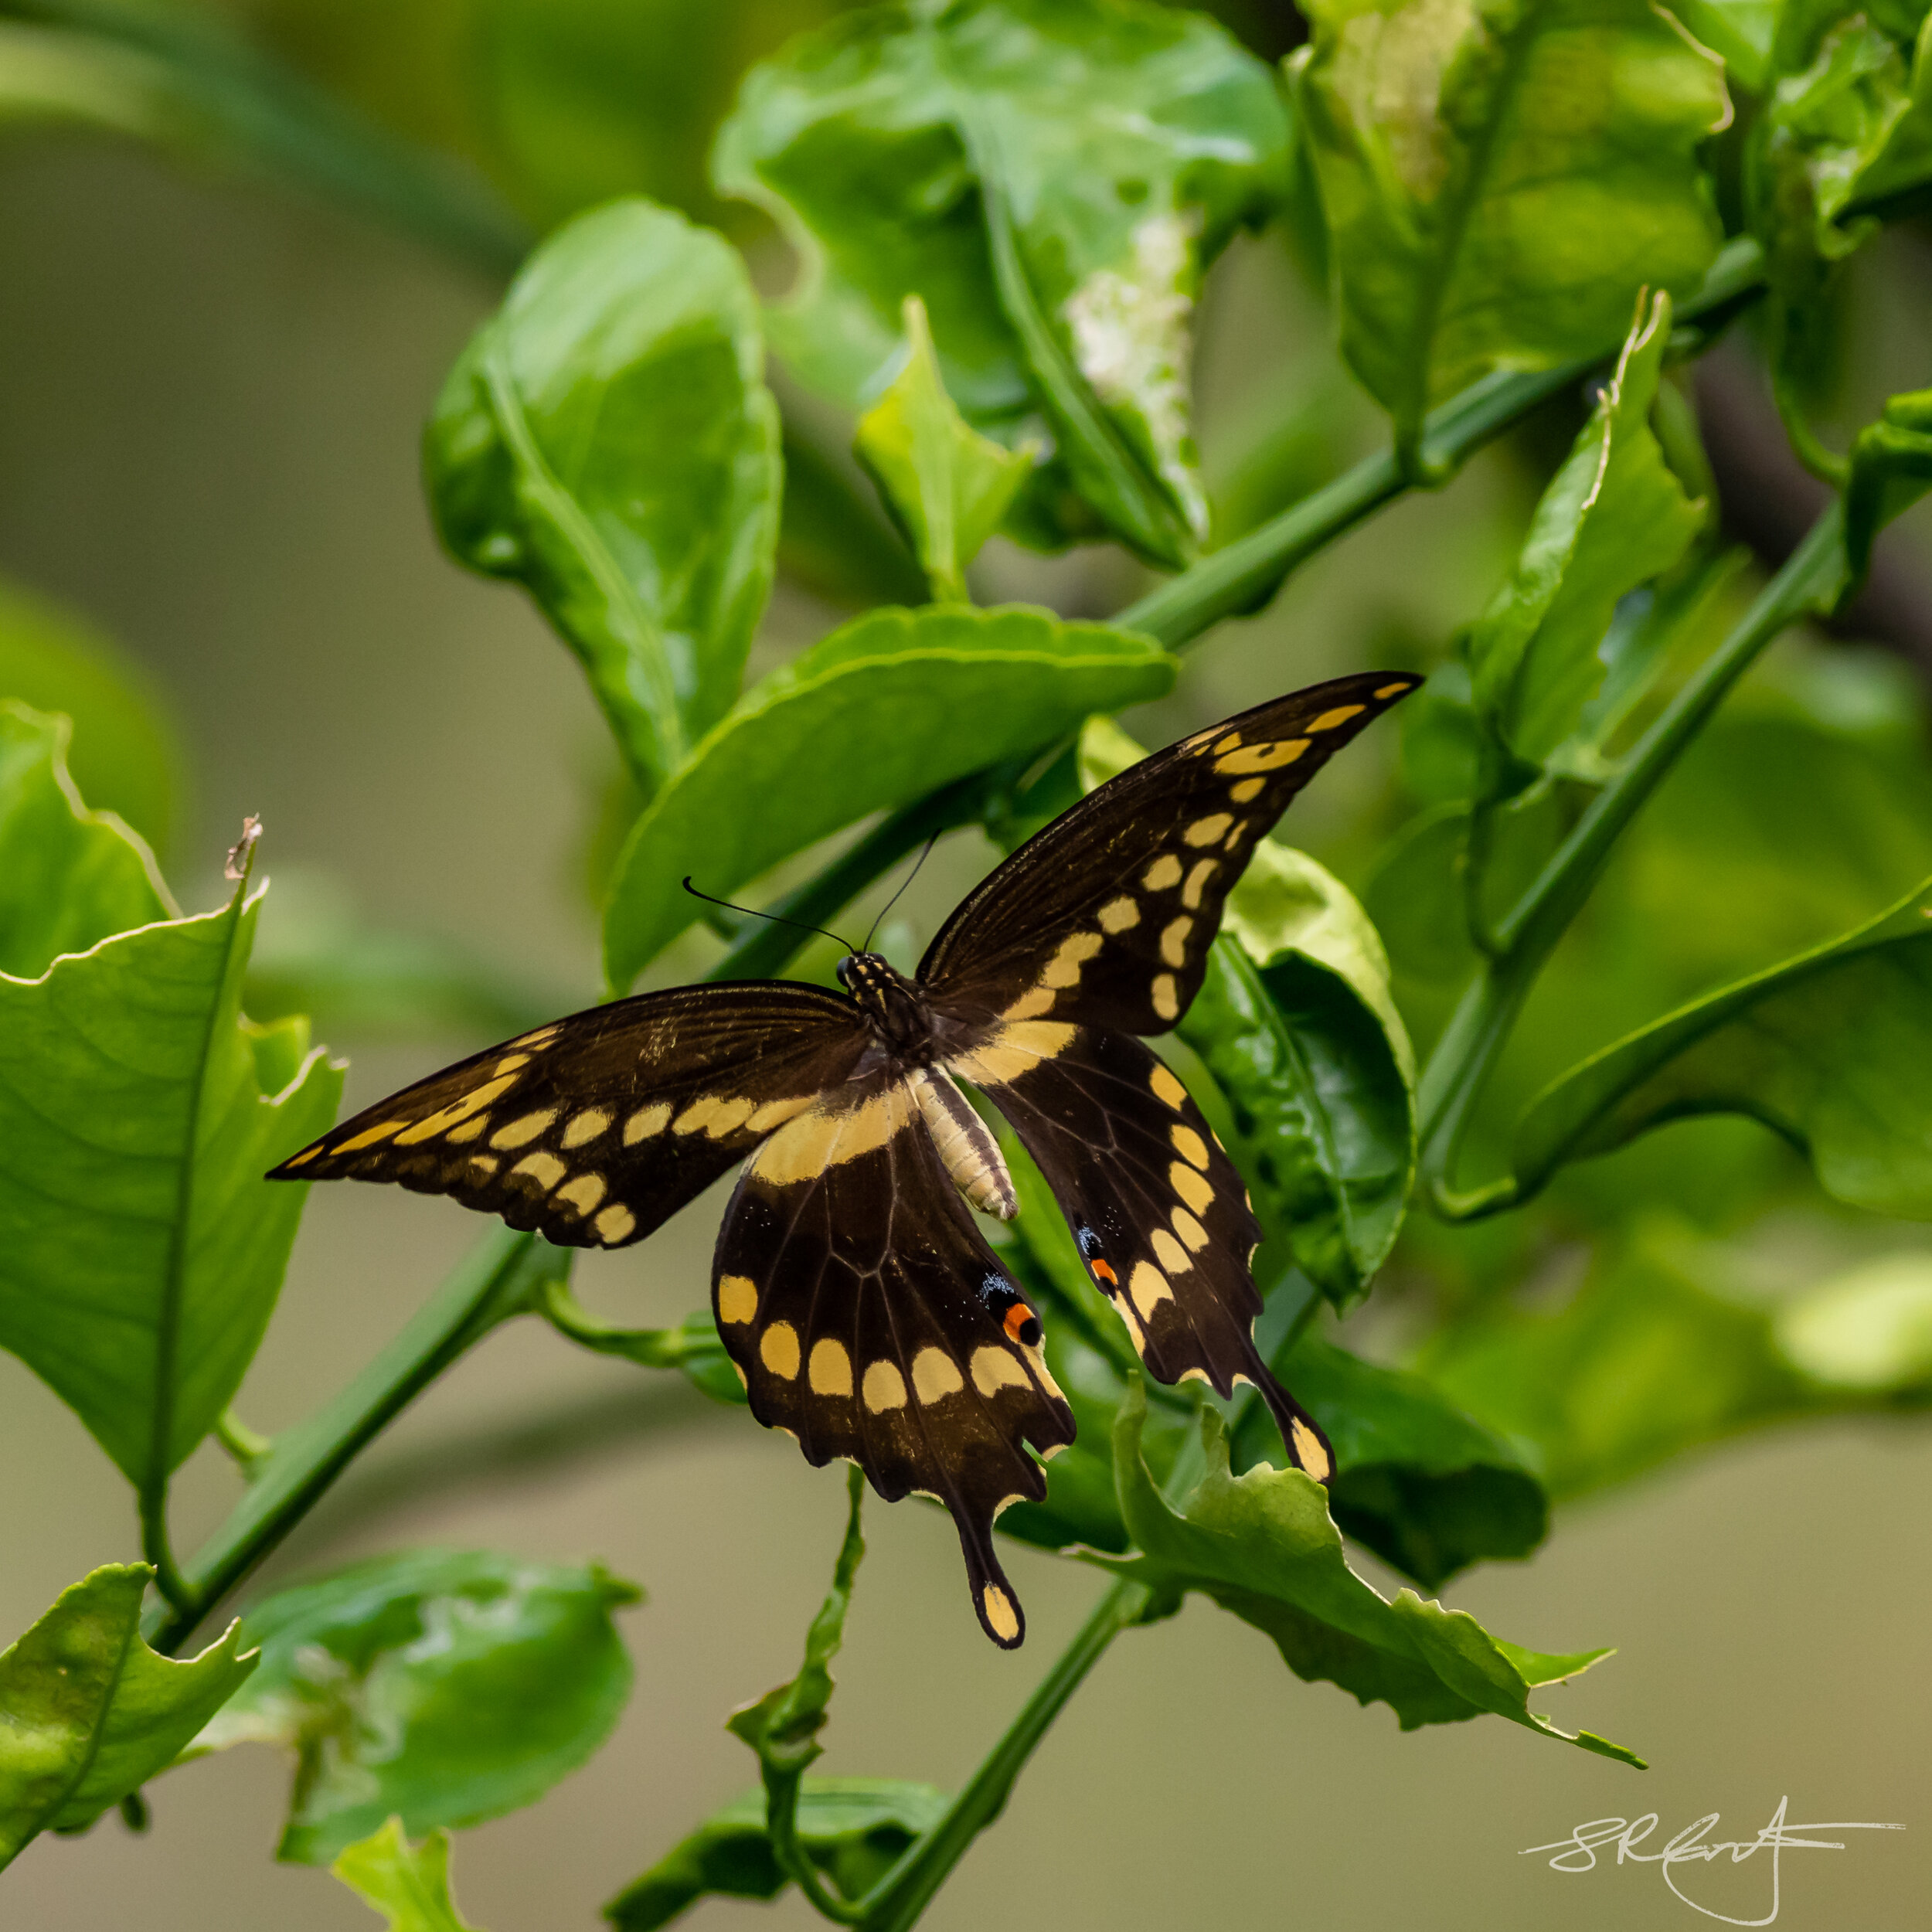 Same Swallowtail, from the backside.